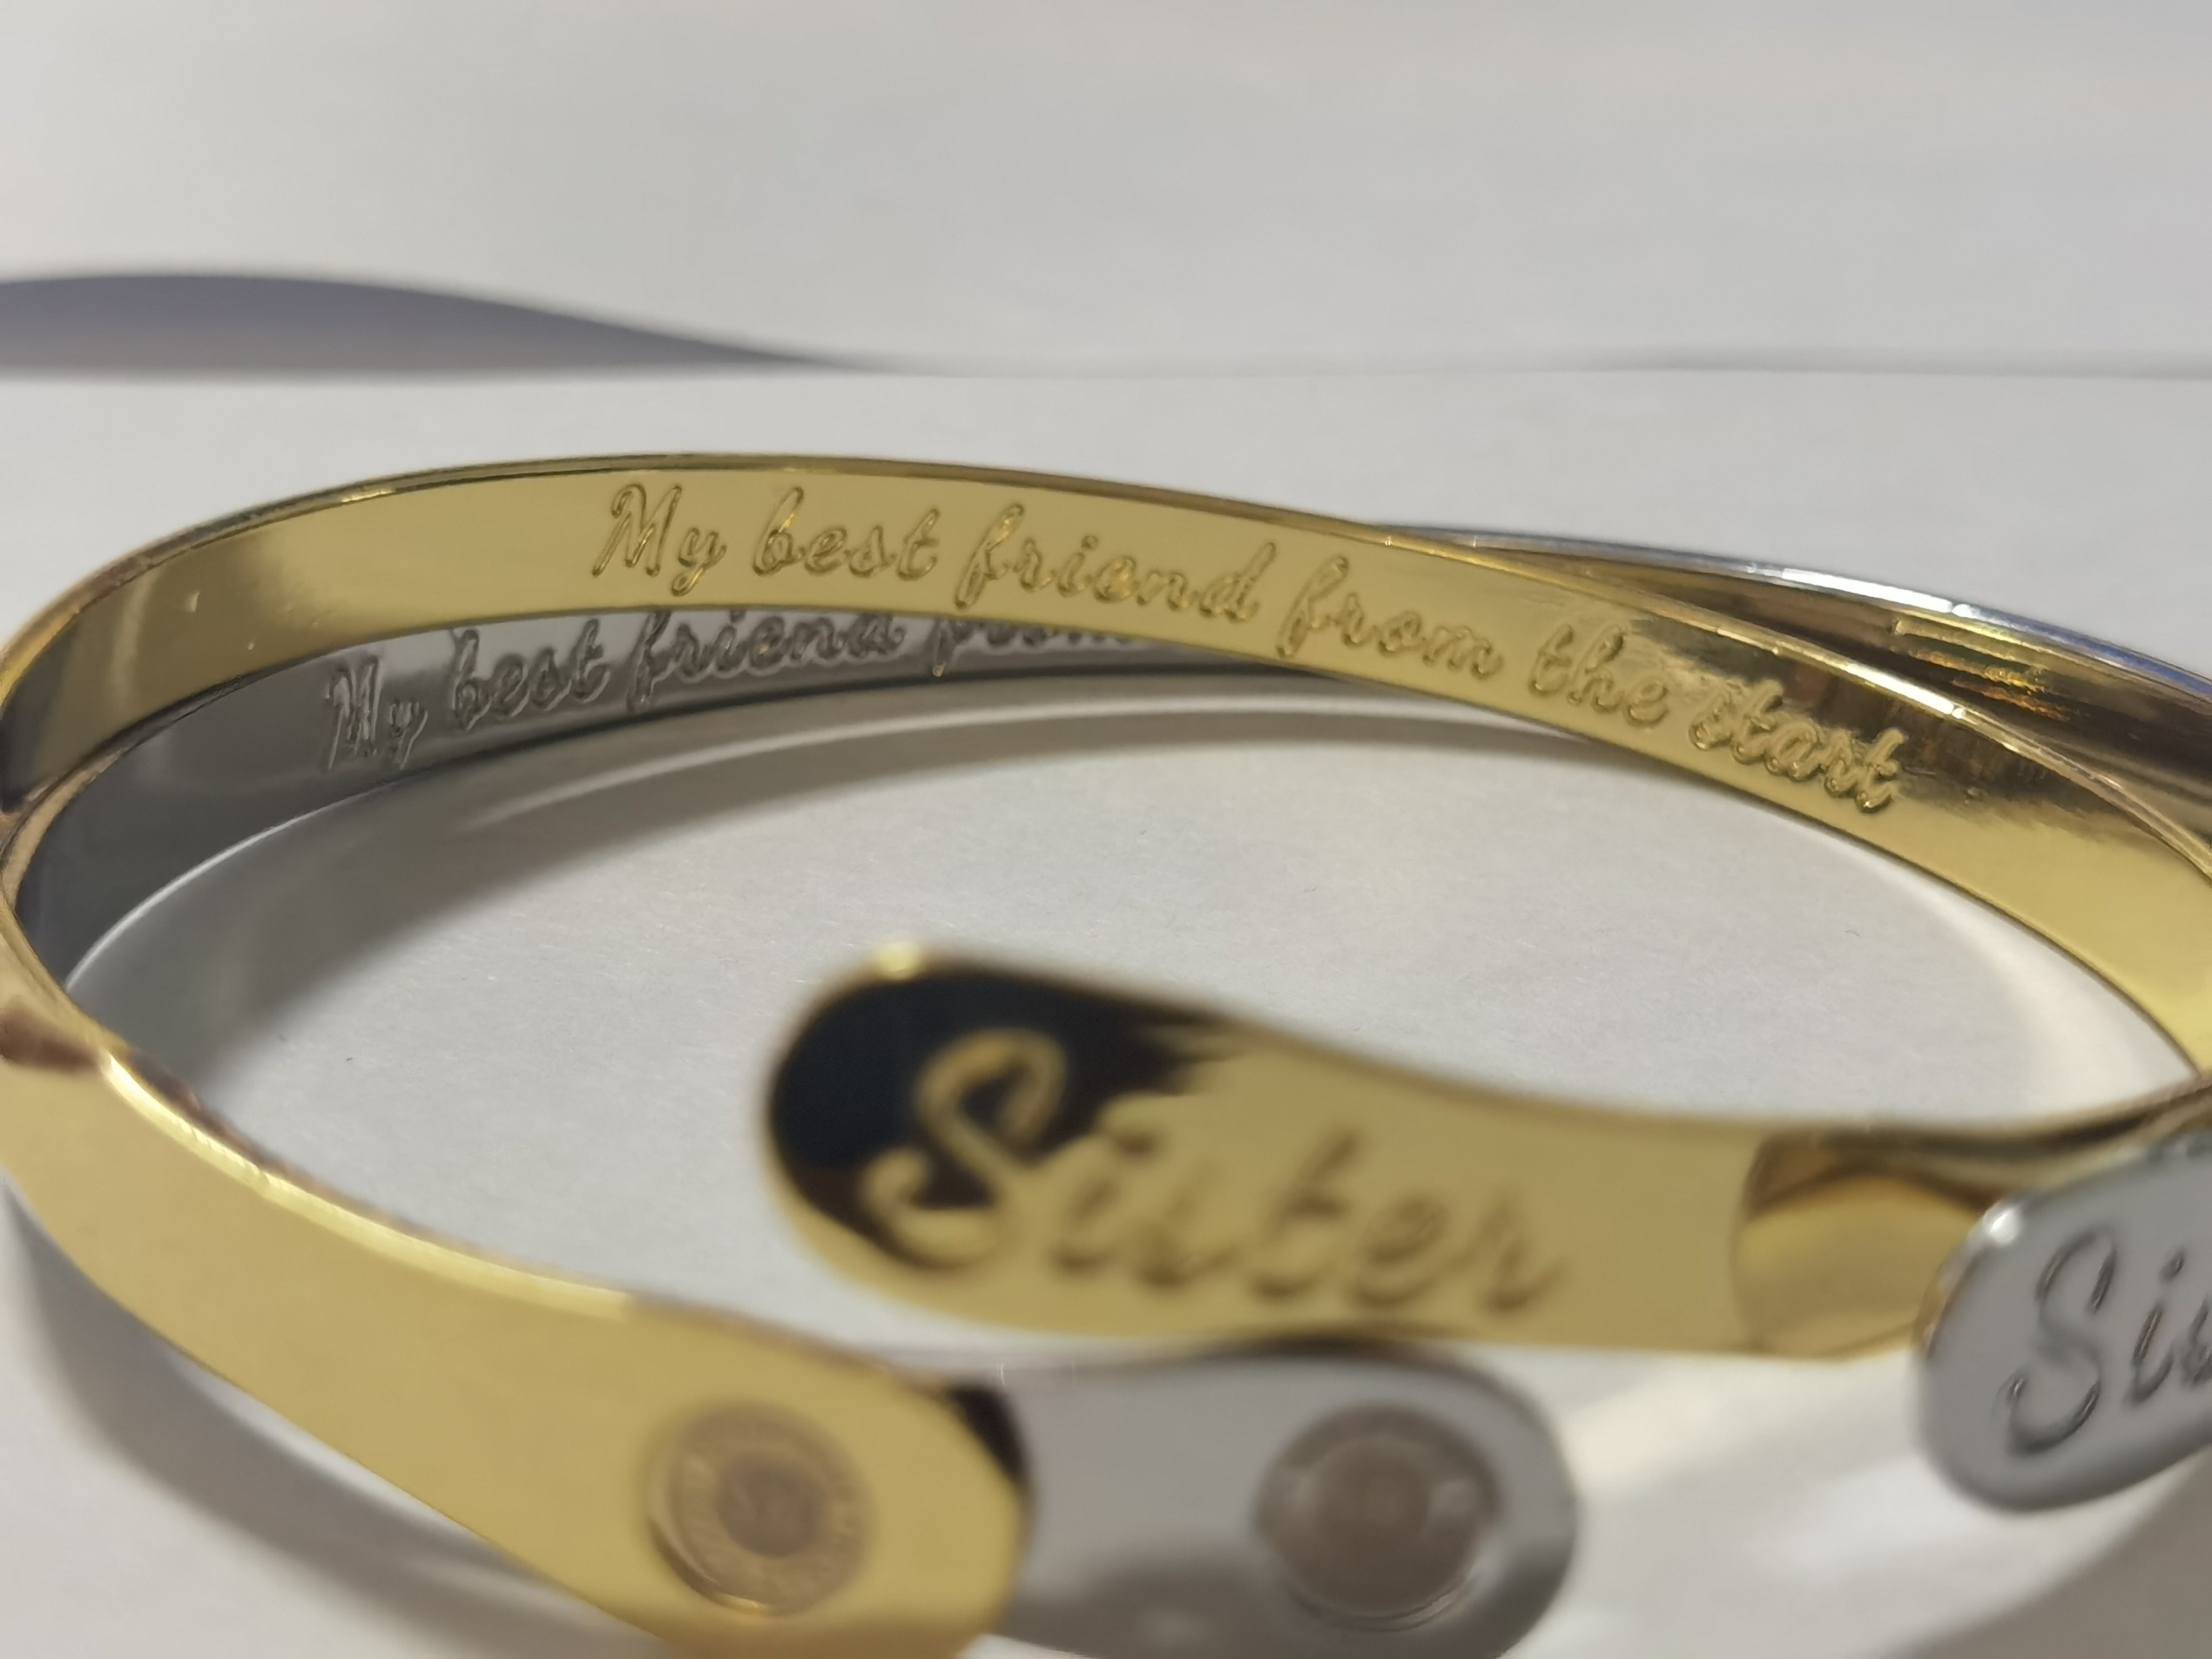 Engraved Roman Numeral Bangle – YOUR SOUL PURPOSE